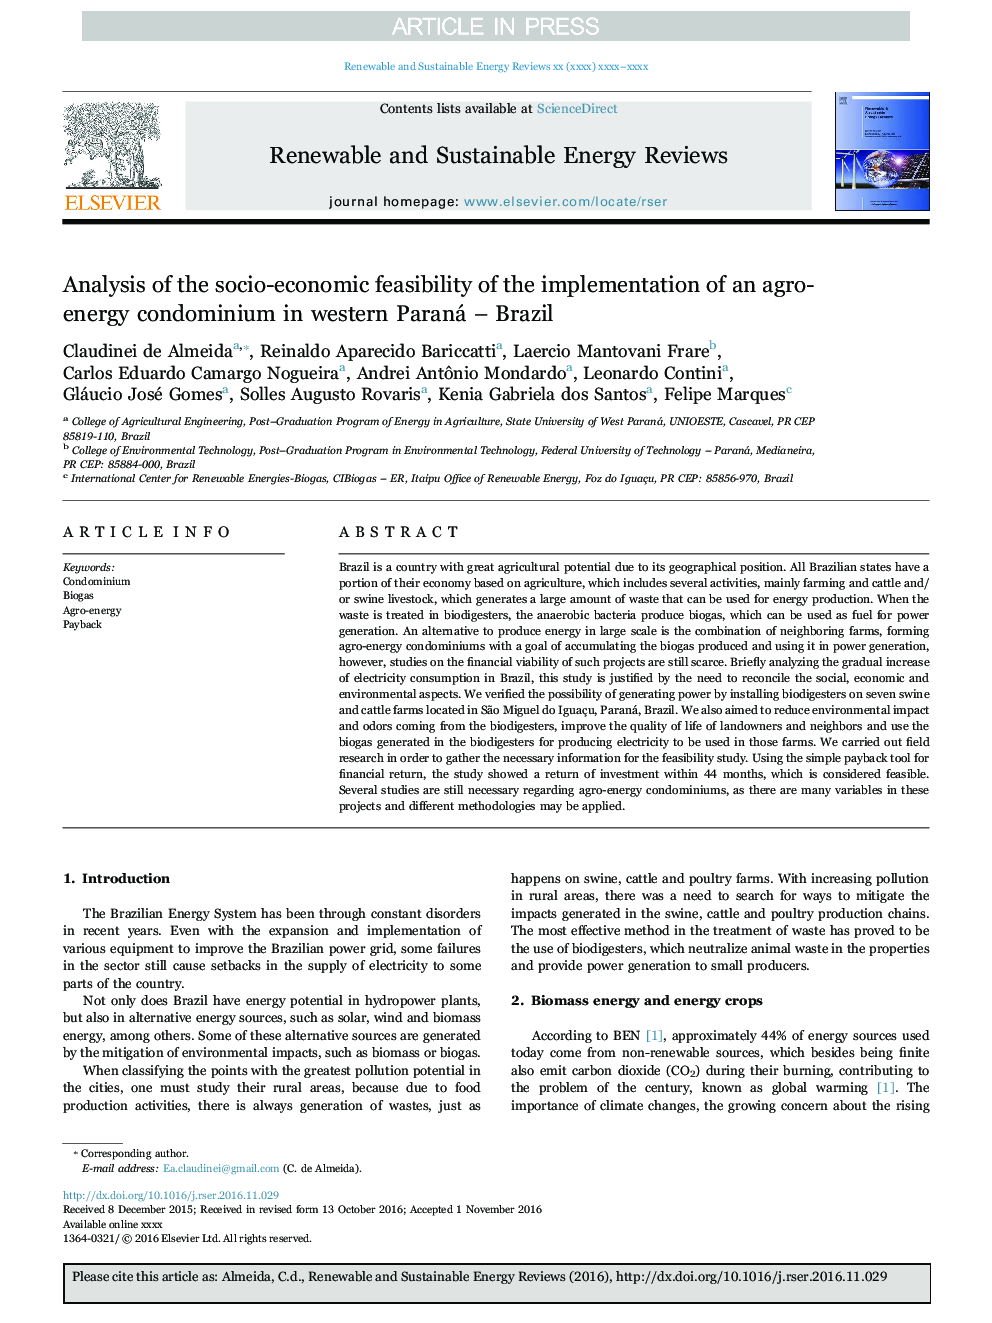 Analysis of the socio-economic feasibility of the implementation of an agro-energy condominium in western Paraná - Brazil